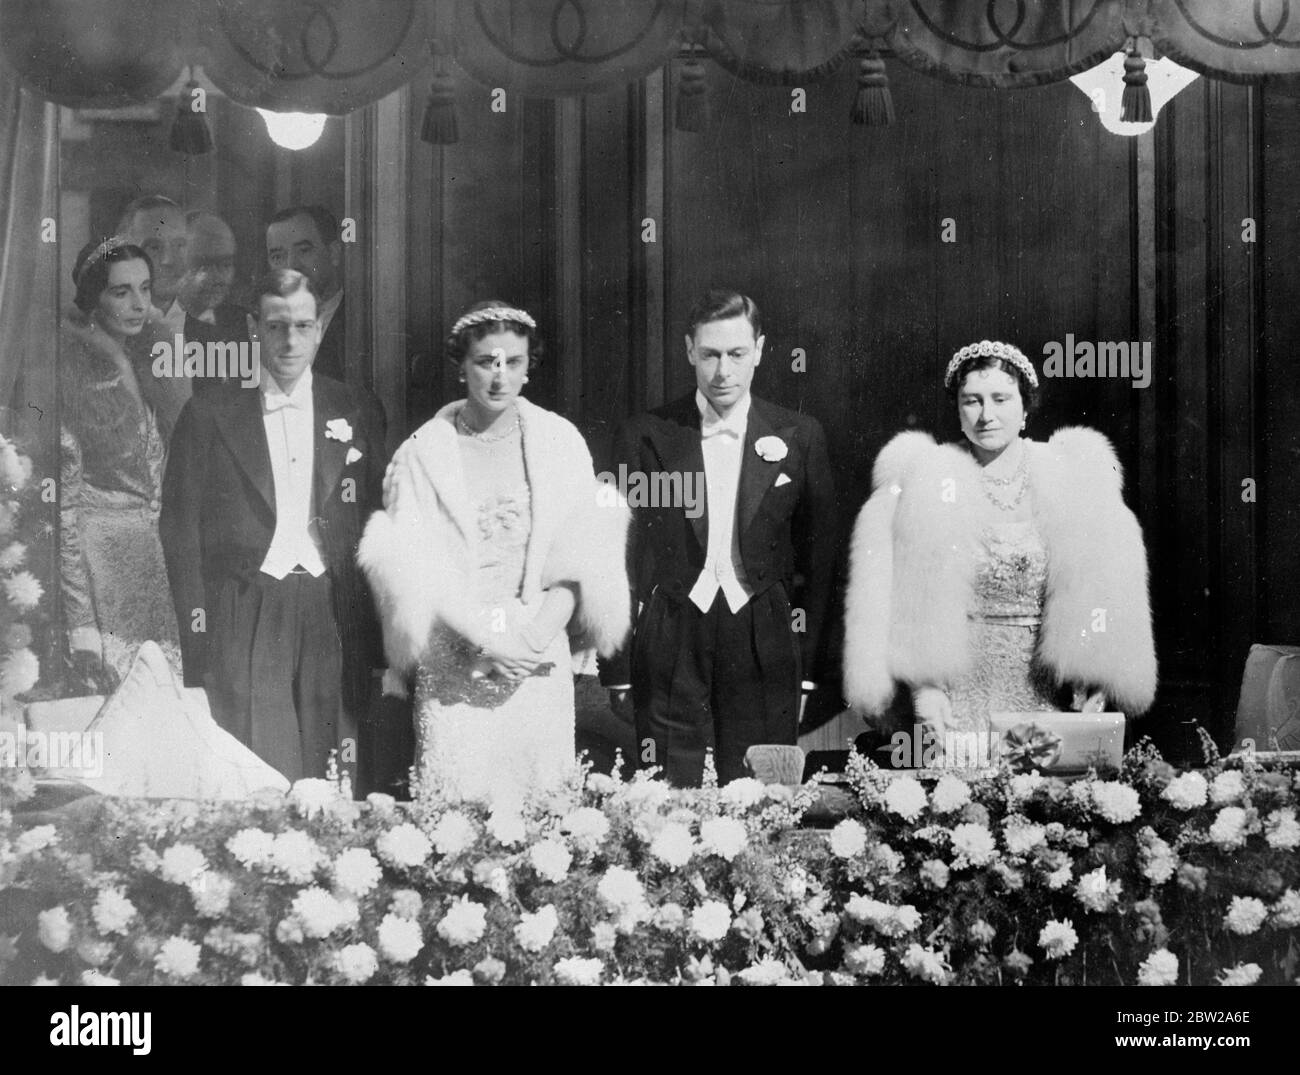 King and Queen attends Royal Command Performance at Palladium. The King and Queen attended the Royal Command Variety Performance in aid of the Variety Artist Benevolent Fund at the Palladium, Argyle Street, London. Photo shows, the King and Queen, with the Duke and Duchess of Kent, standing in the Royal box during the national anthem. 15 November 1937 Stock Photo